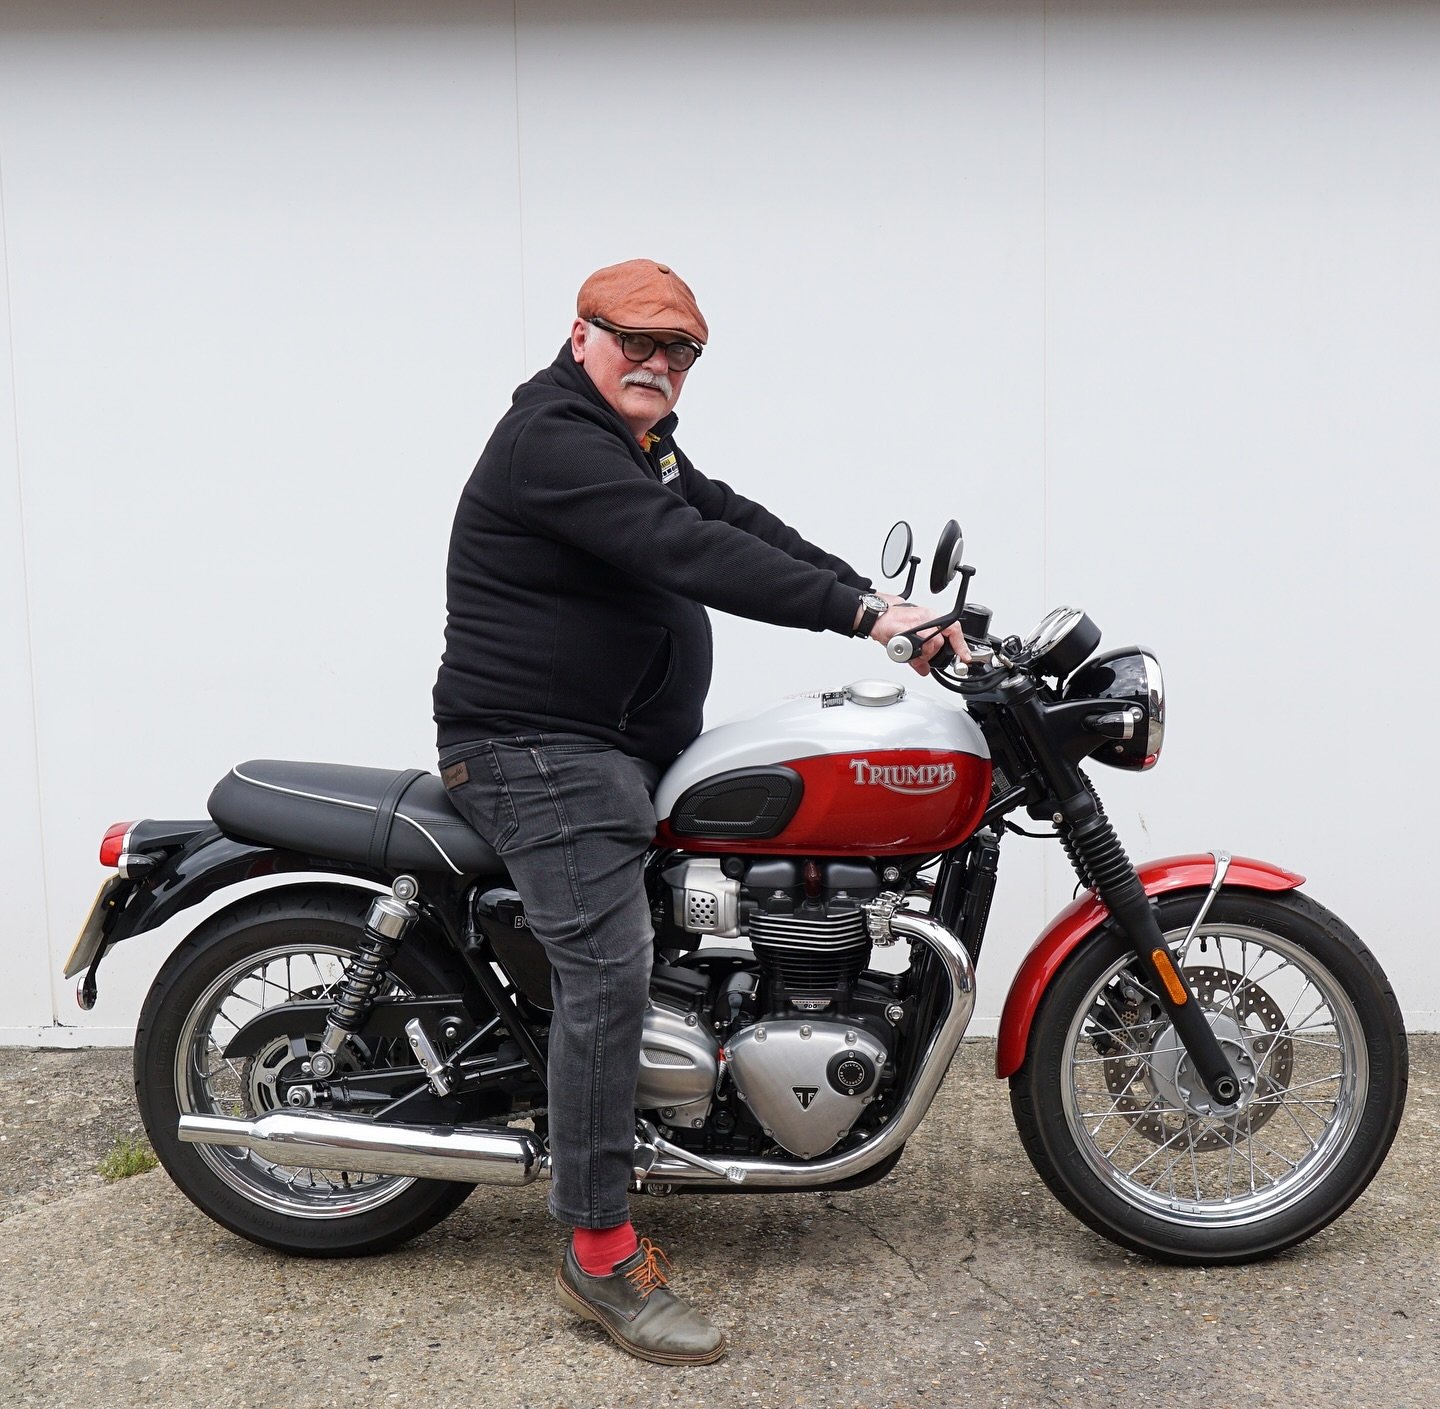 Chris, the owner of Lakenham Creamery, is participating in The Distinguished Gentleman&rsquo;s Ride on Sunday 19th May 2024. 

Comment from Chris:

On Sunday the 19th of May 2024, I&rsquo;m riding in The Distinguished Gentleman&rsquo;s Ride with fell